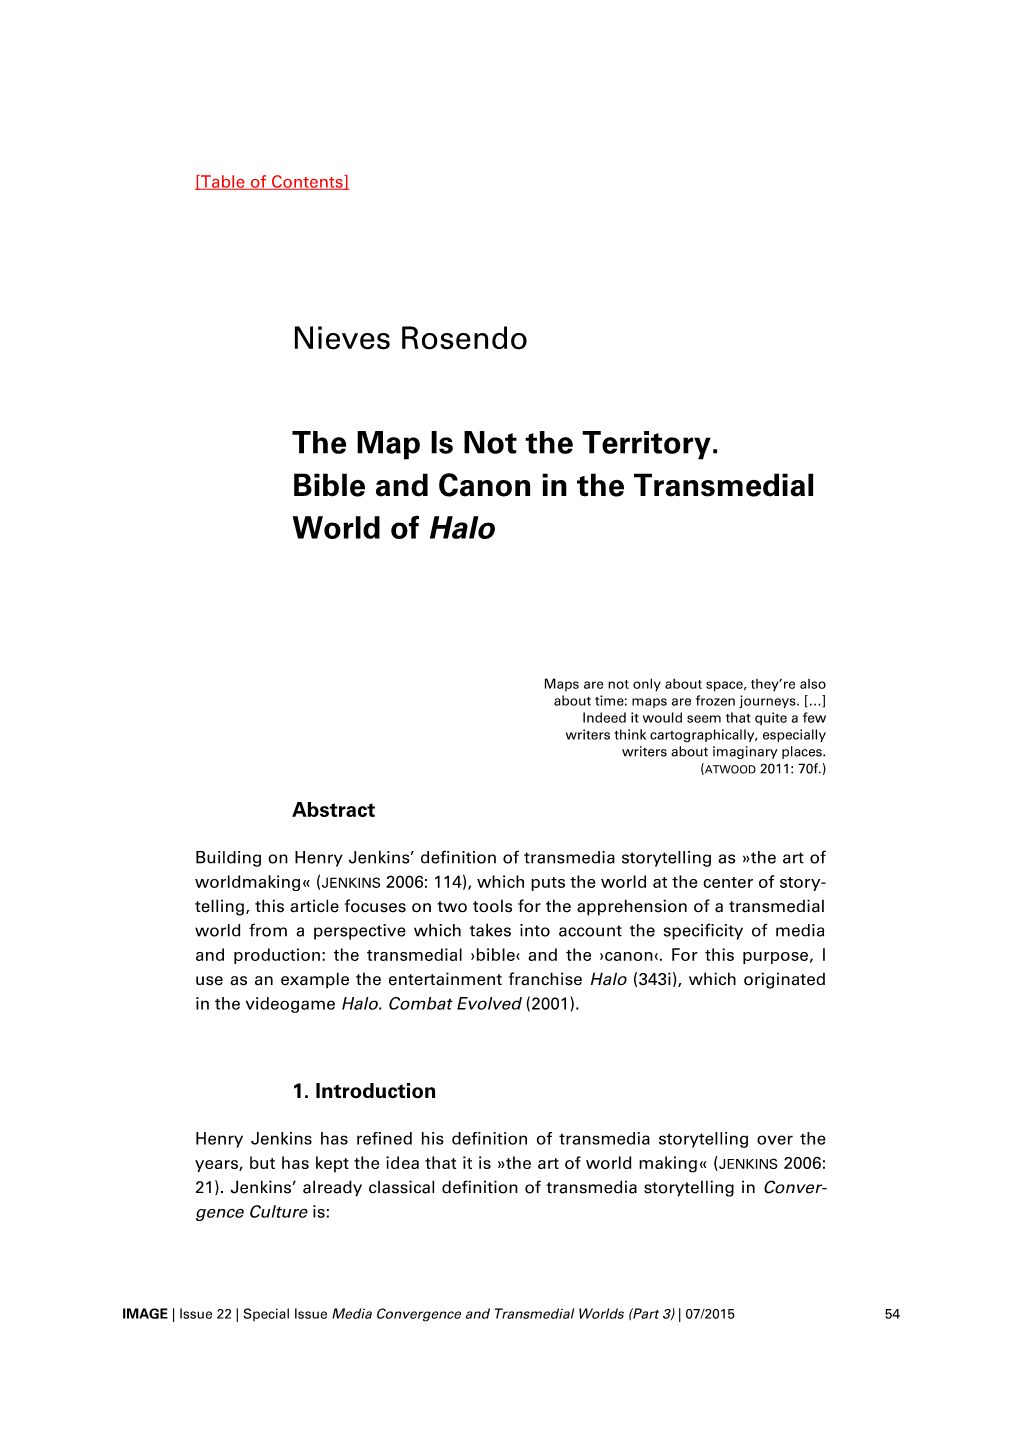 Nieves Rosendo the Map Is Not the Territory. Bible and Canon in The